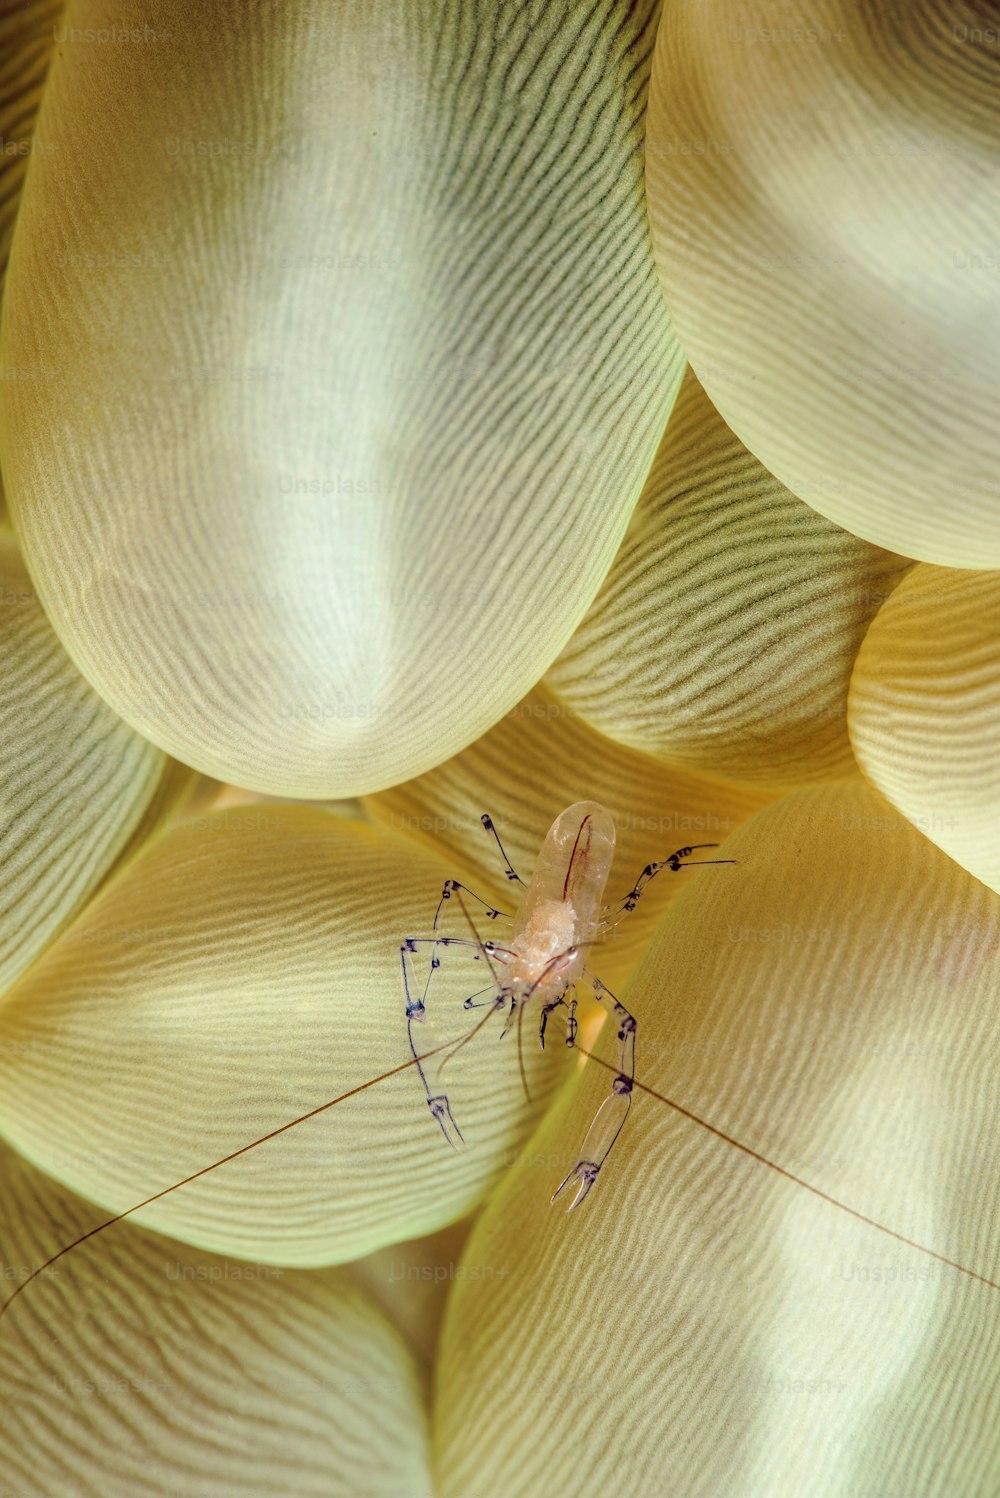 A Bubble Coral Shrimp in Lembeh